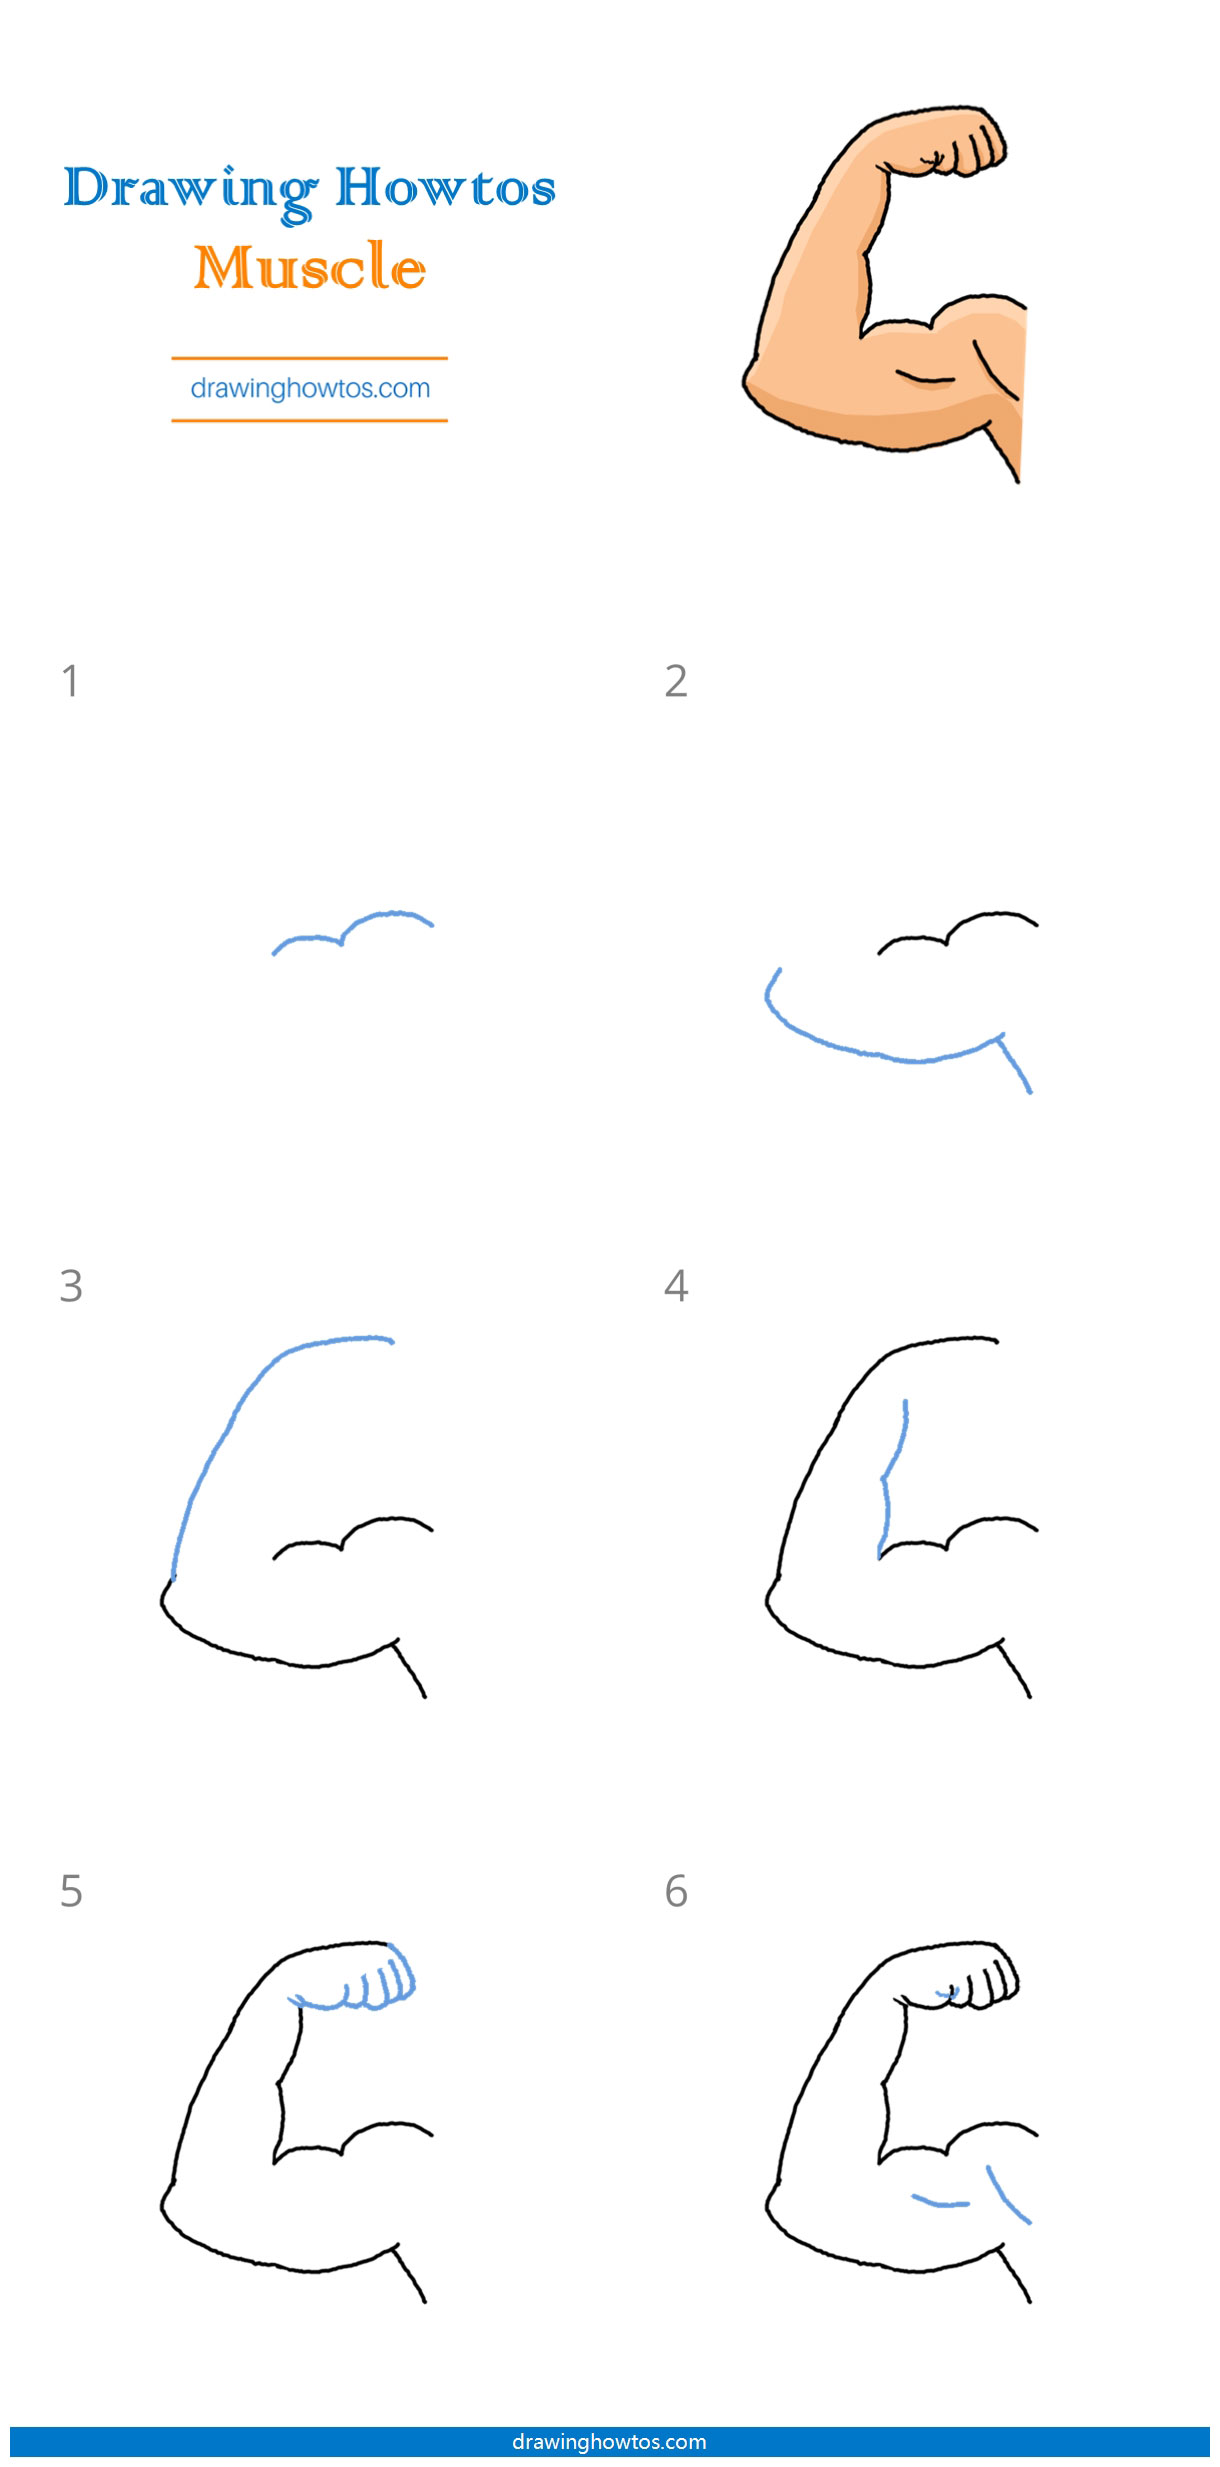 How to Draw Arm Muscles Step by Step